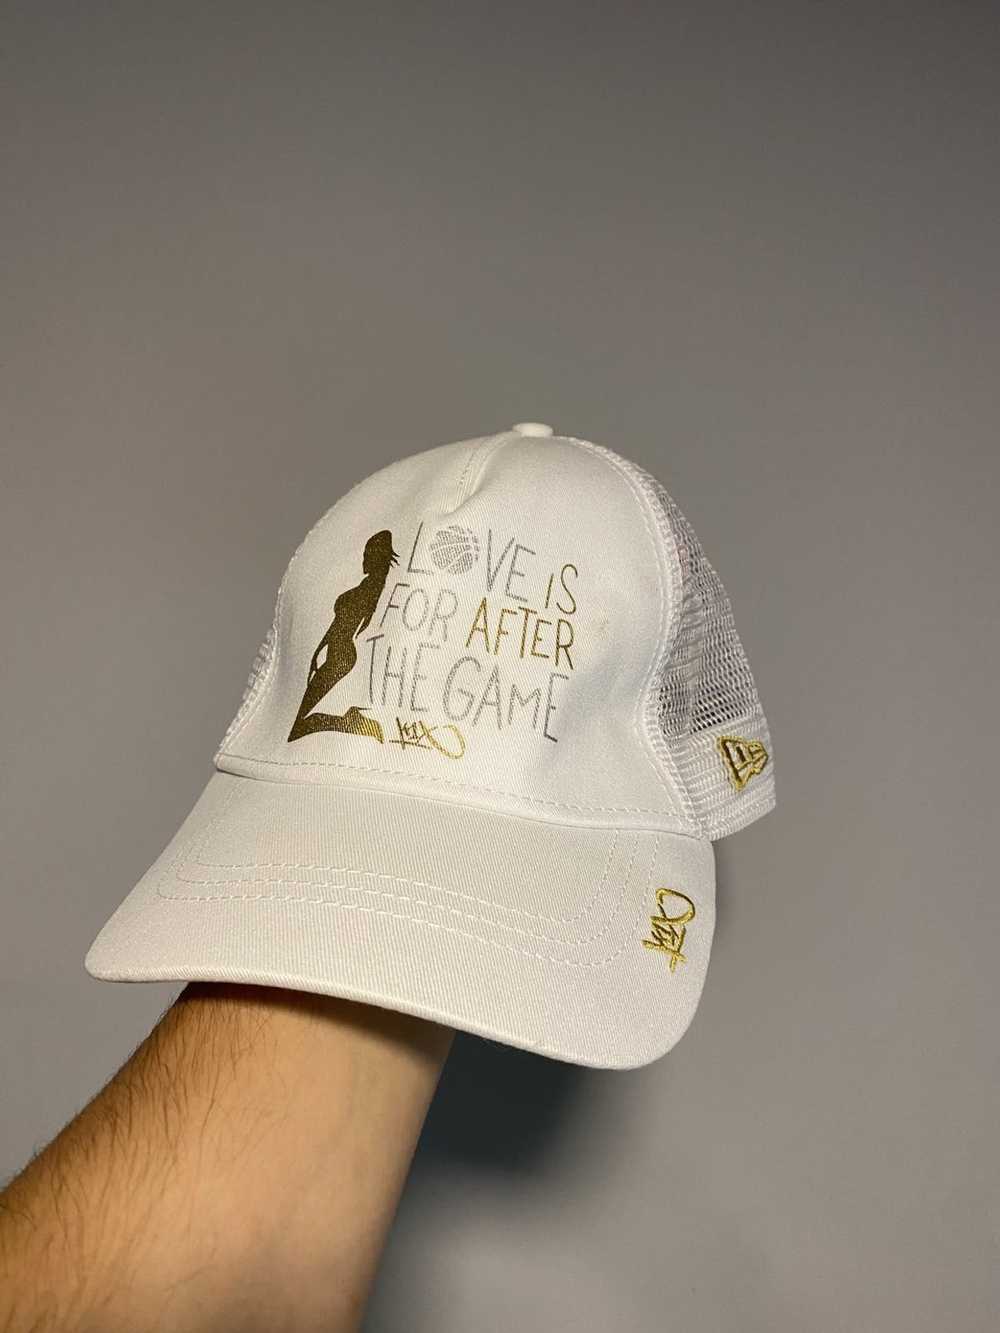 NBA × New Era × Vintage “Love is for after the ga… - image 1